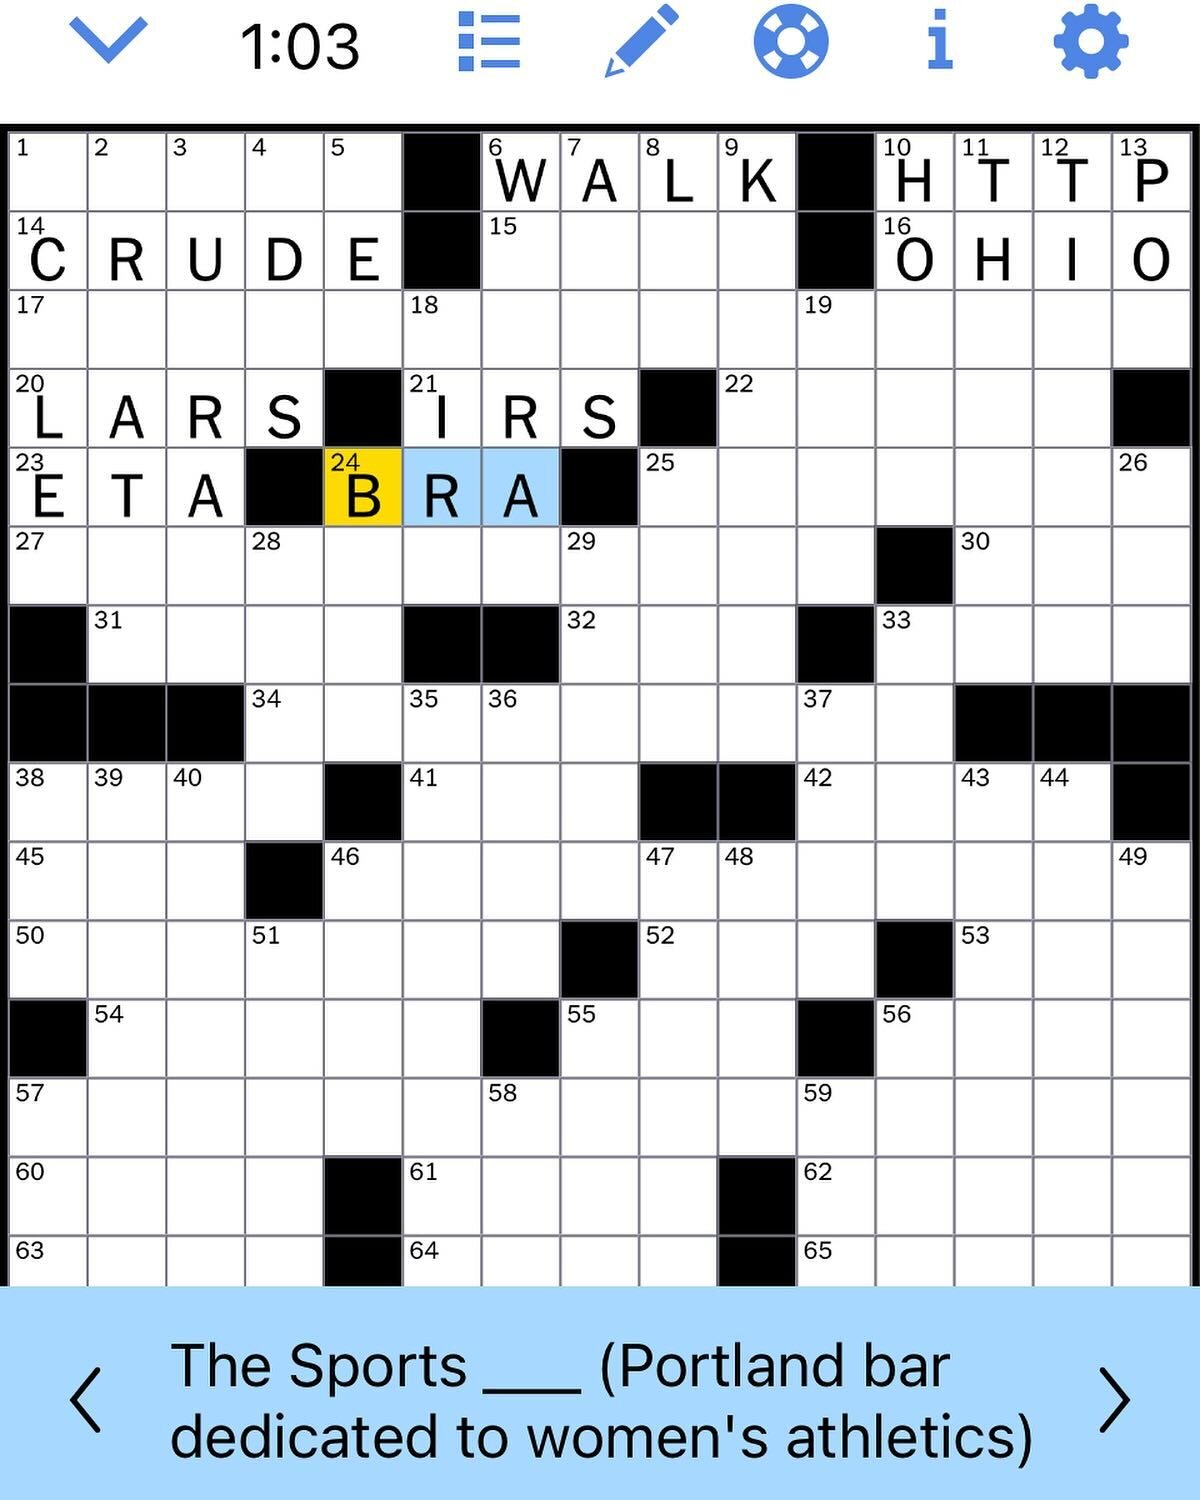 @sportsbrapdx You were a clue in yesterday&rsquo;s NYT Crossword? That made me so happy.
#sportsbrapdx #represent #portland #nytcrossword